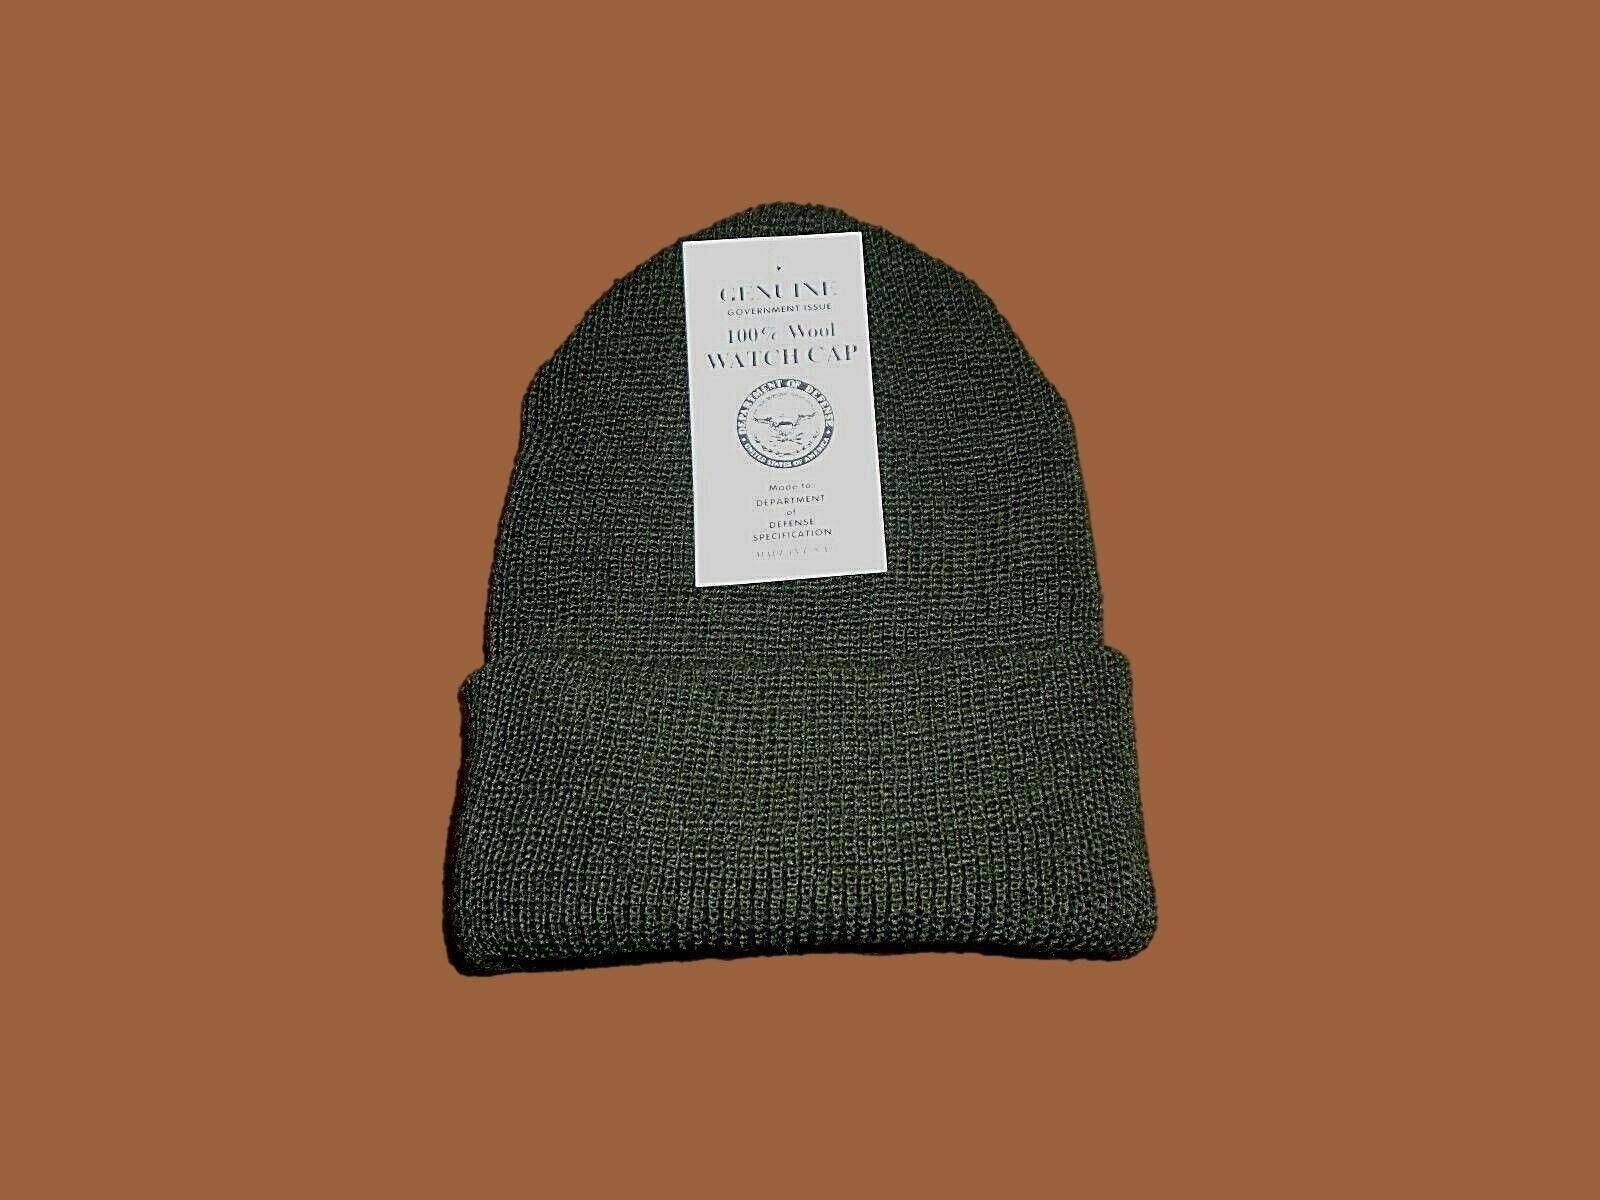 NEW GENUINE MILITARY ISSUE 100% WOOL GREEN WATCH CAP COLD WEATHER HAT U.S.A MADE